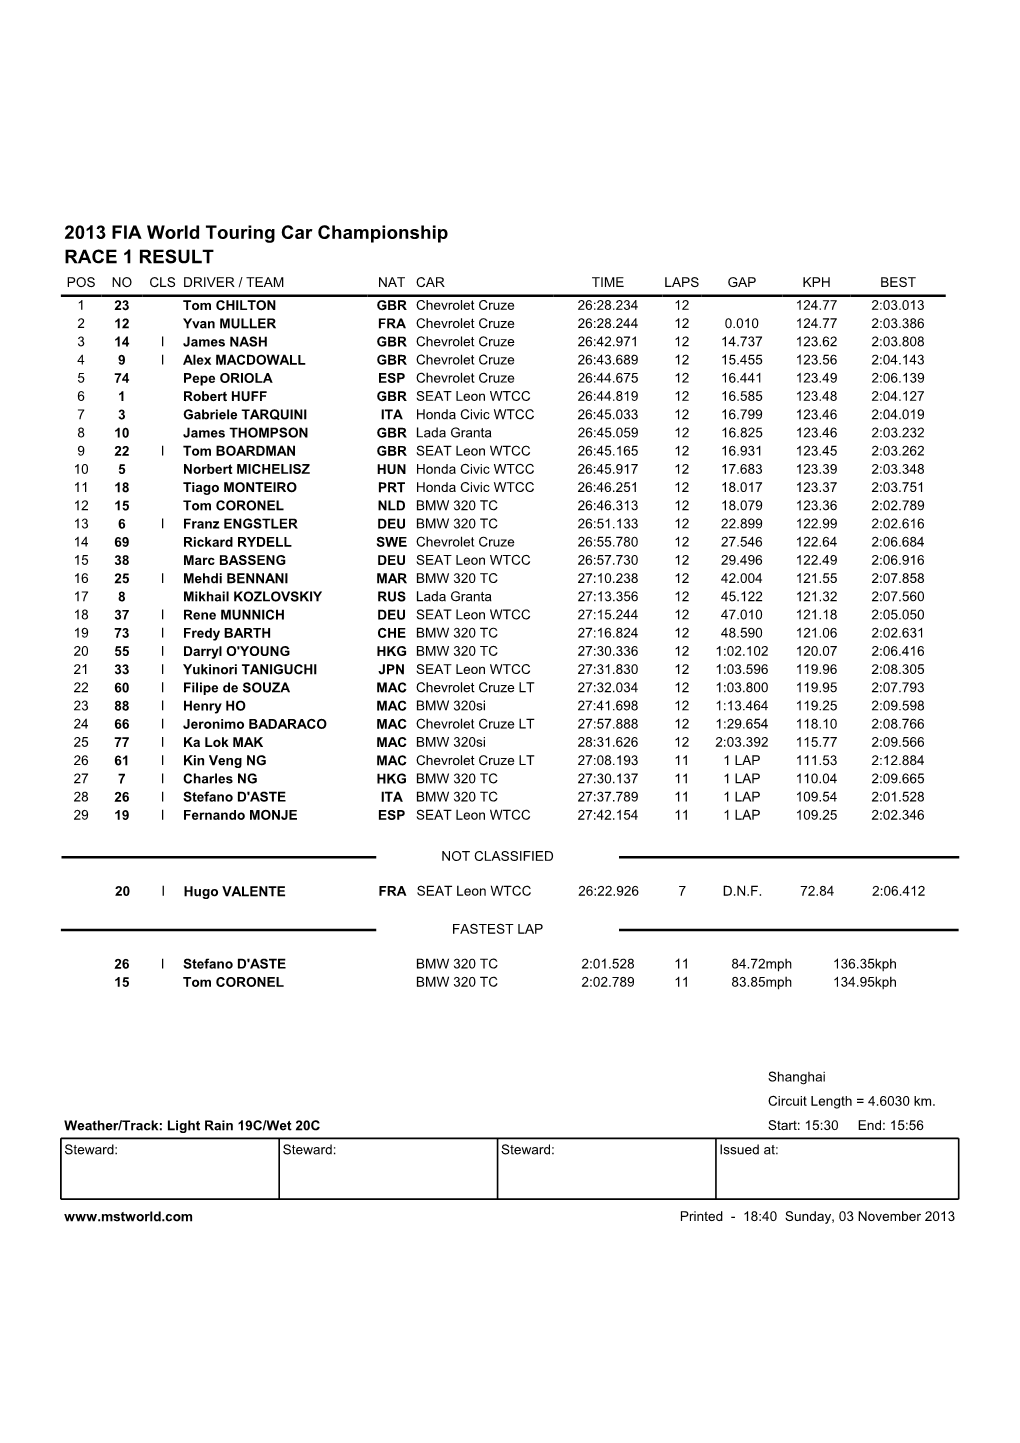 RACE 1 RESULT 2013 FIA World Touring Car